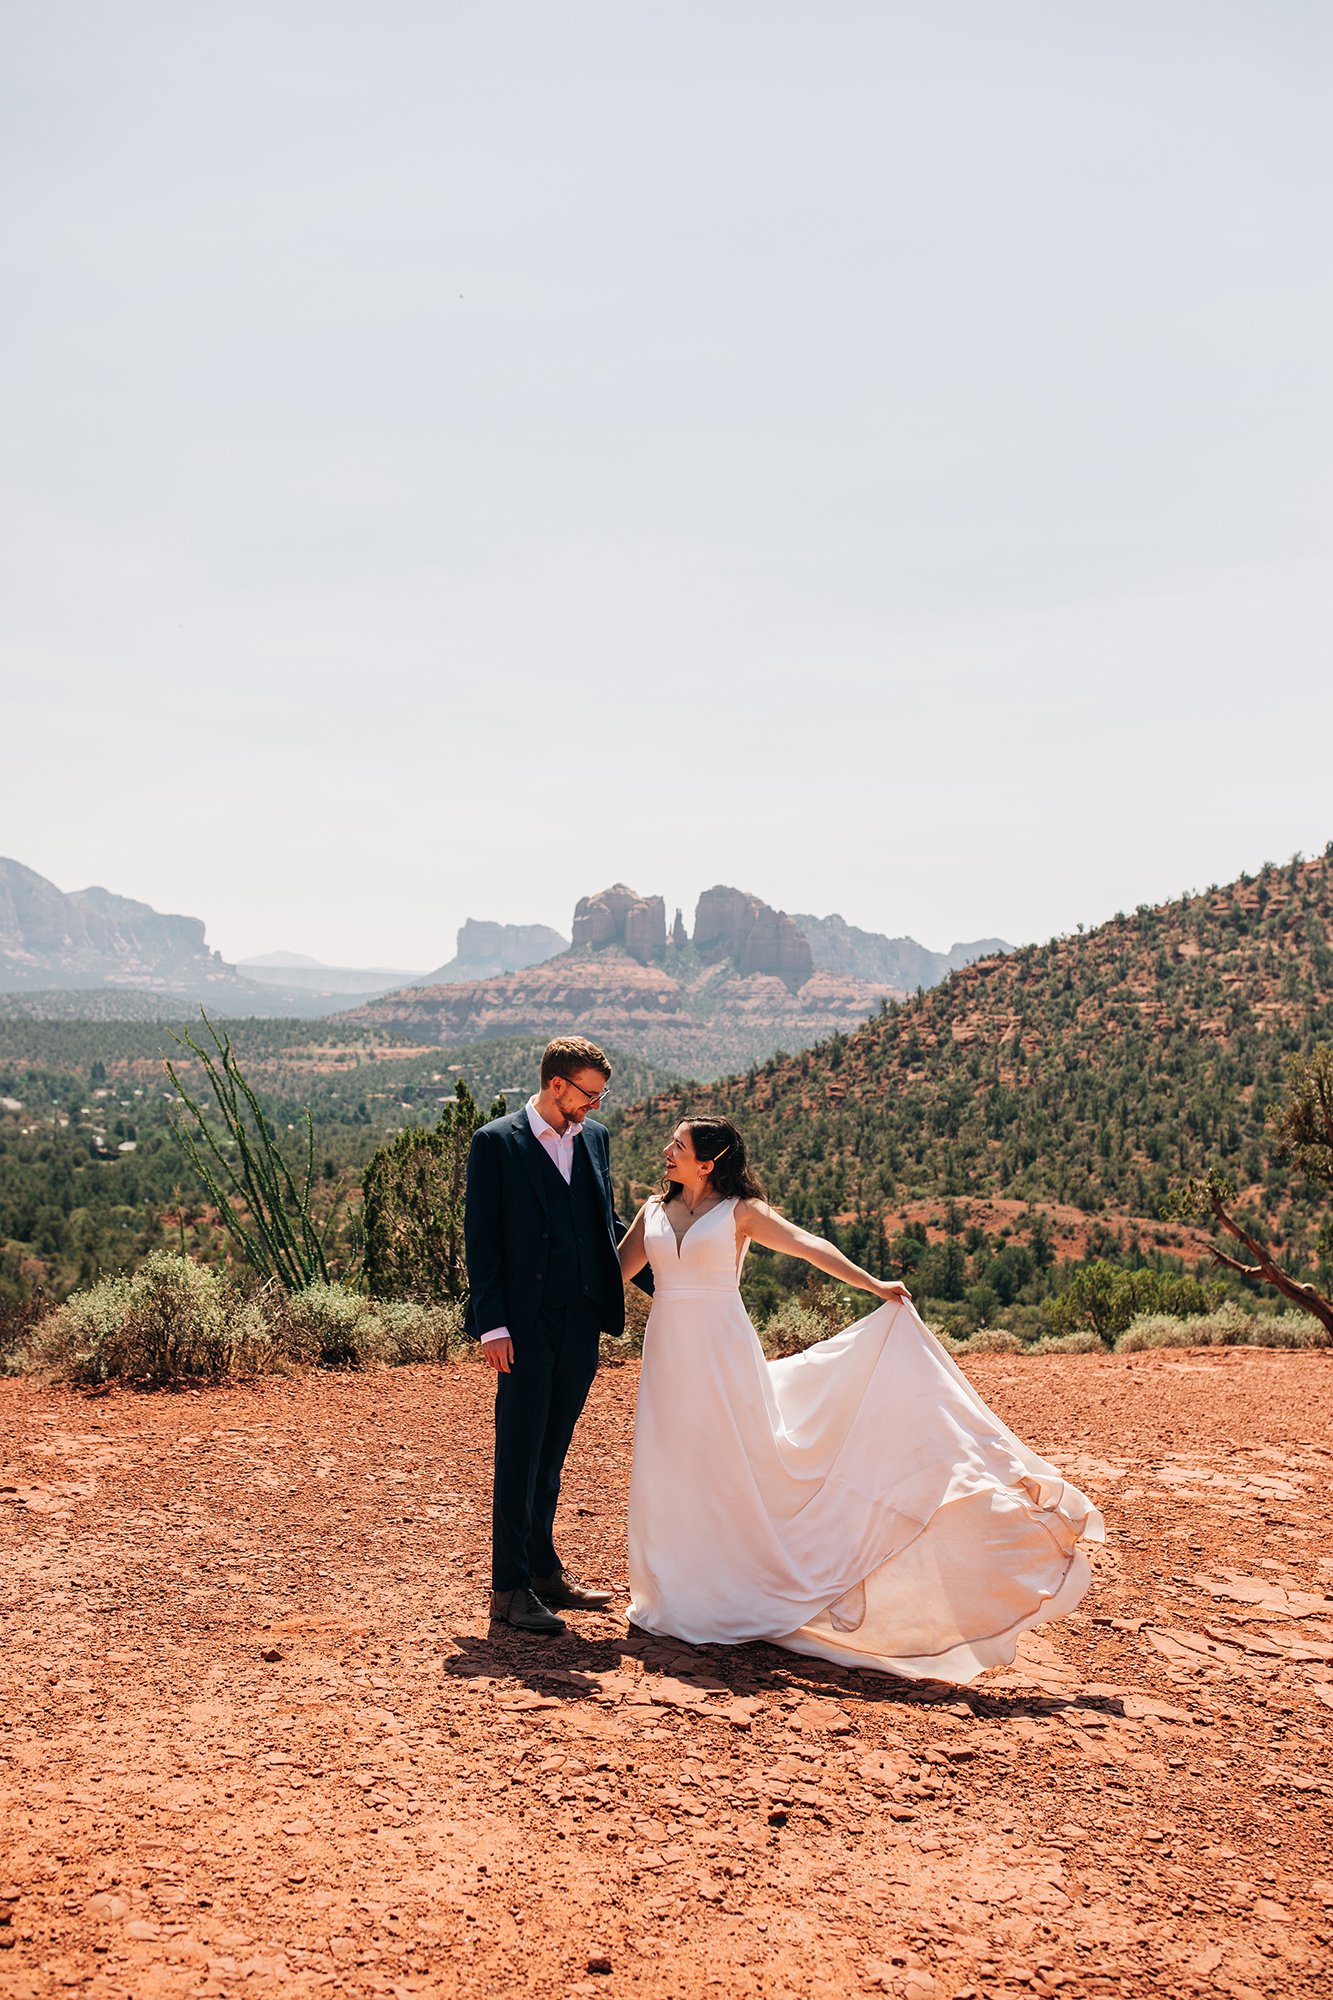 Steph shows off her amazing dress against the Sedona skyline while her new husband, Matt, gets close